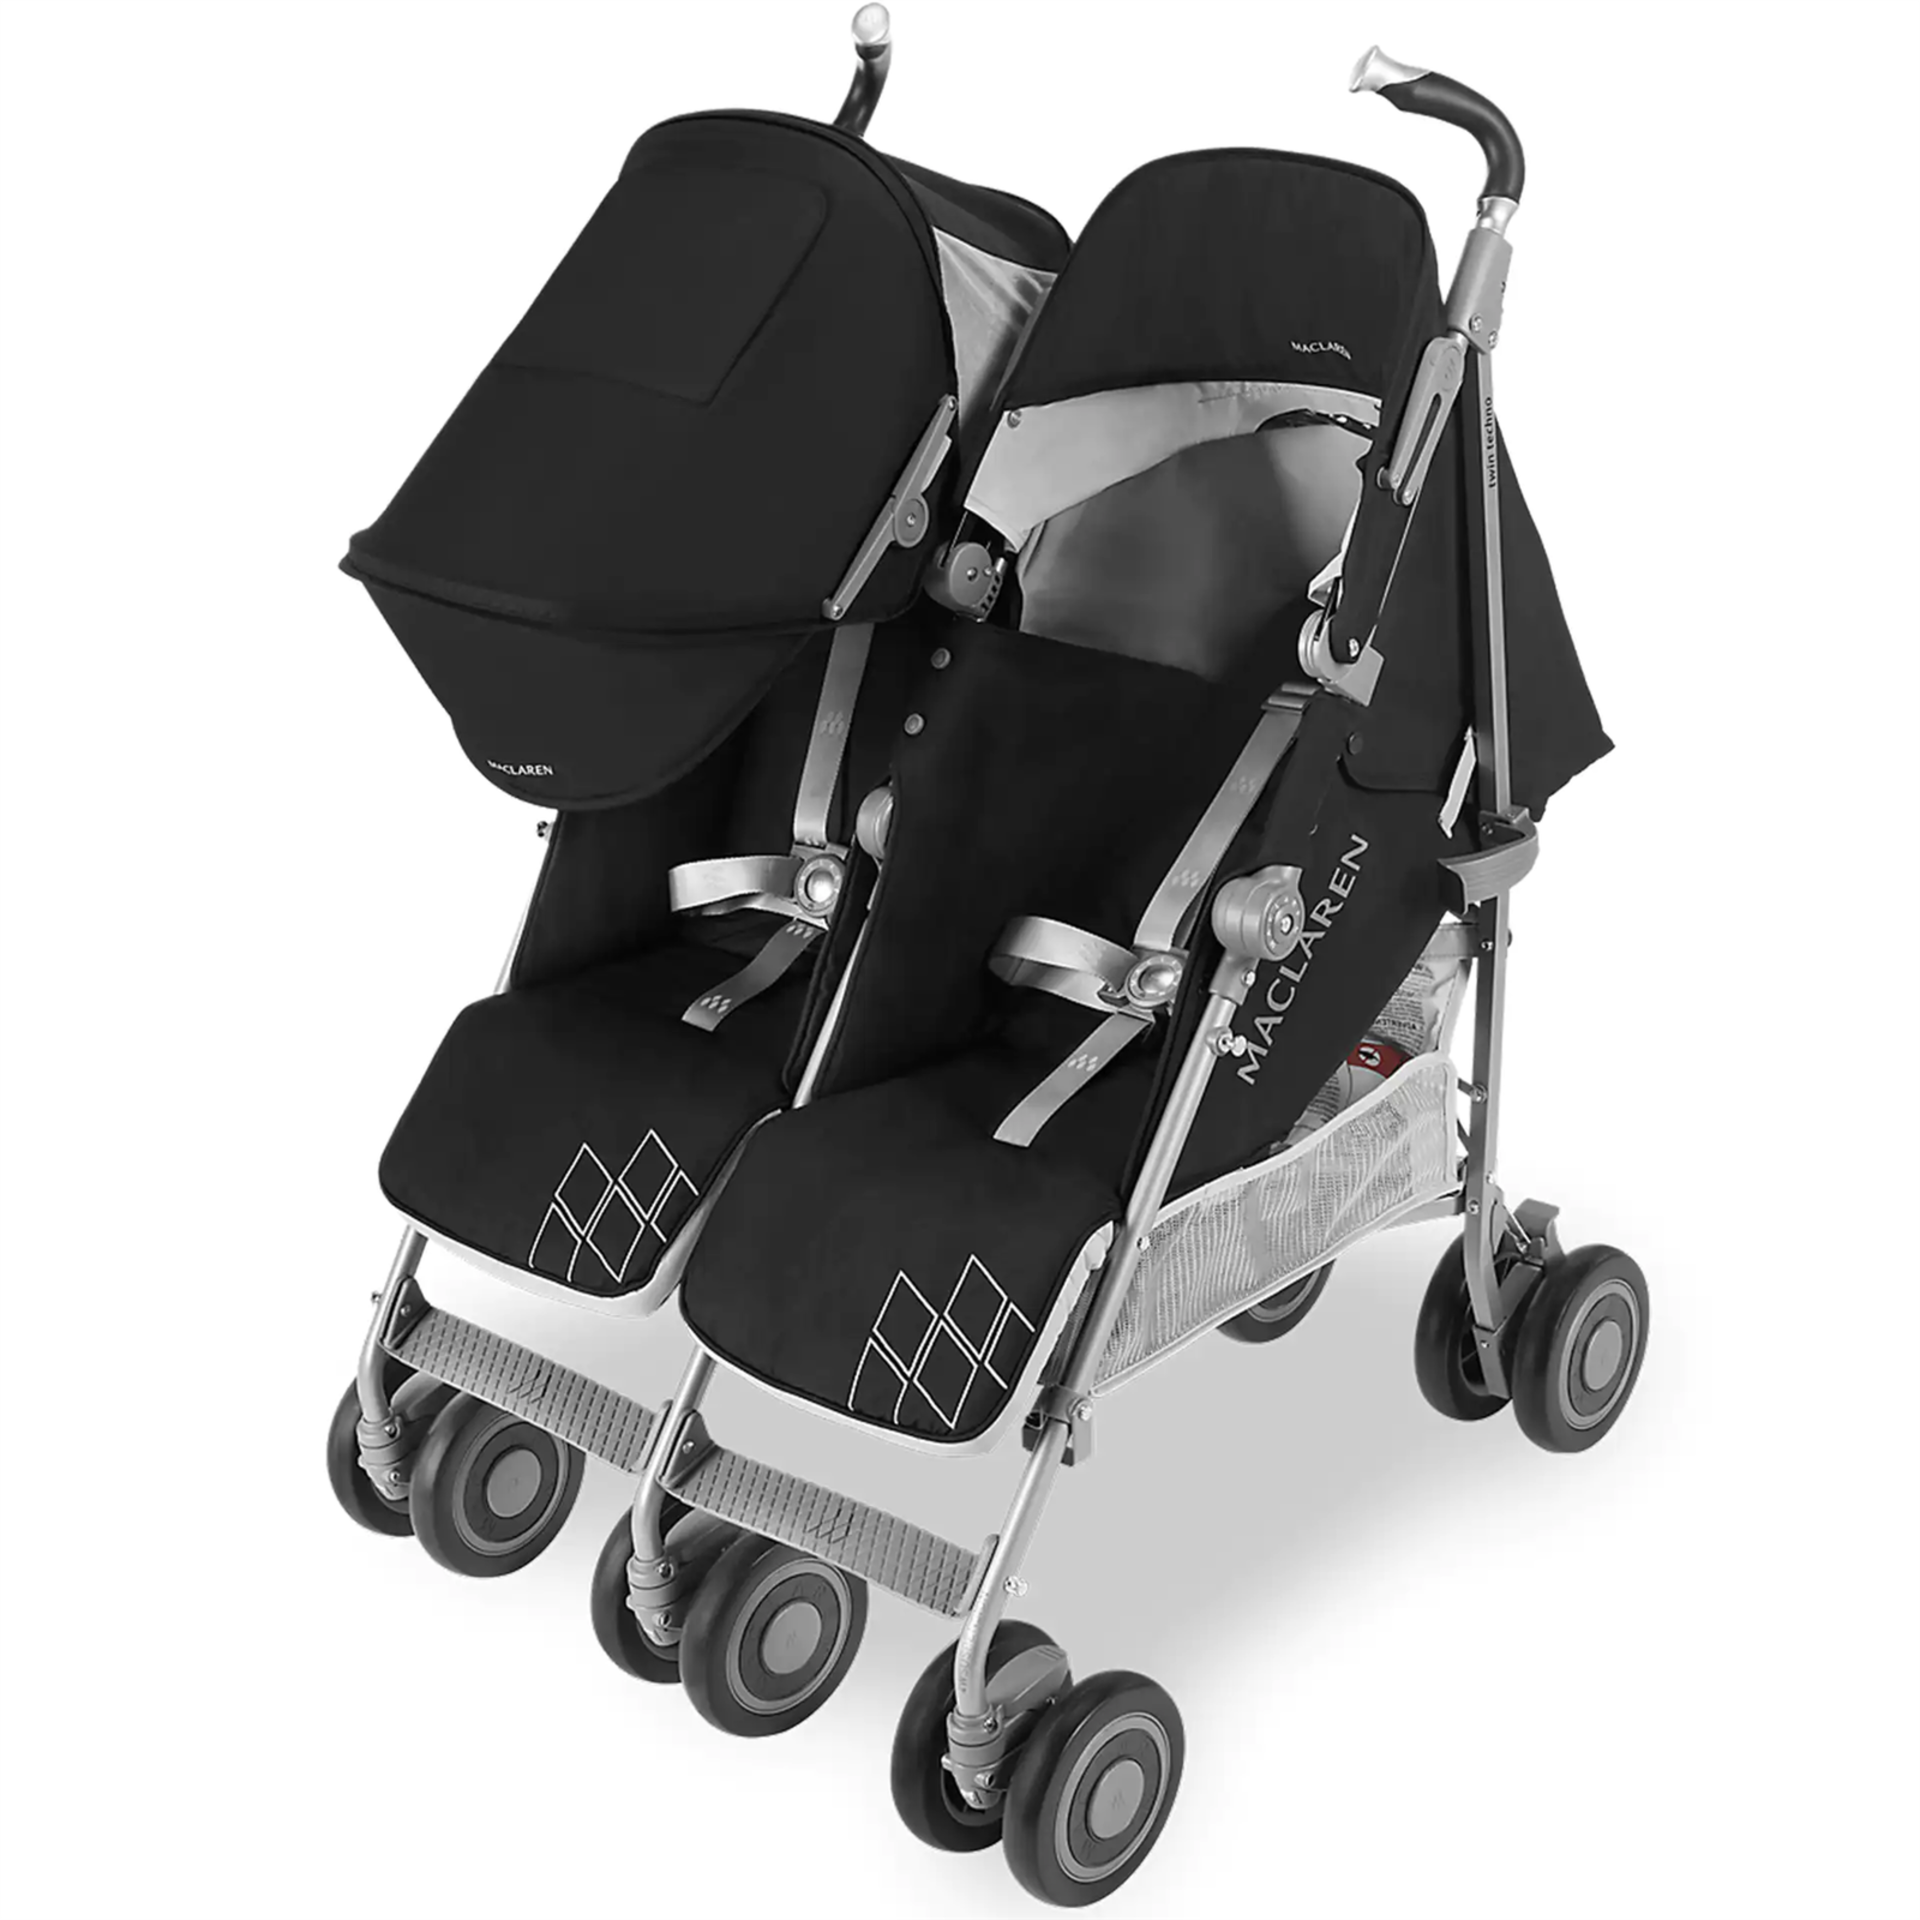 Maclaren Pushchair Twin Techno Black Built For Comfort/Performance For 2 Rrp £450 - Image 2 of 7